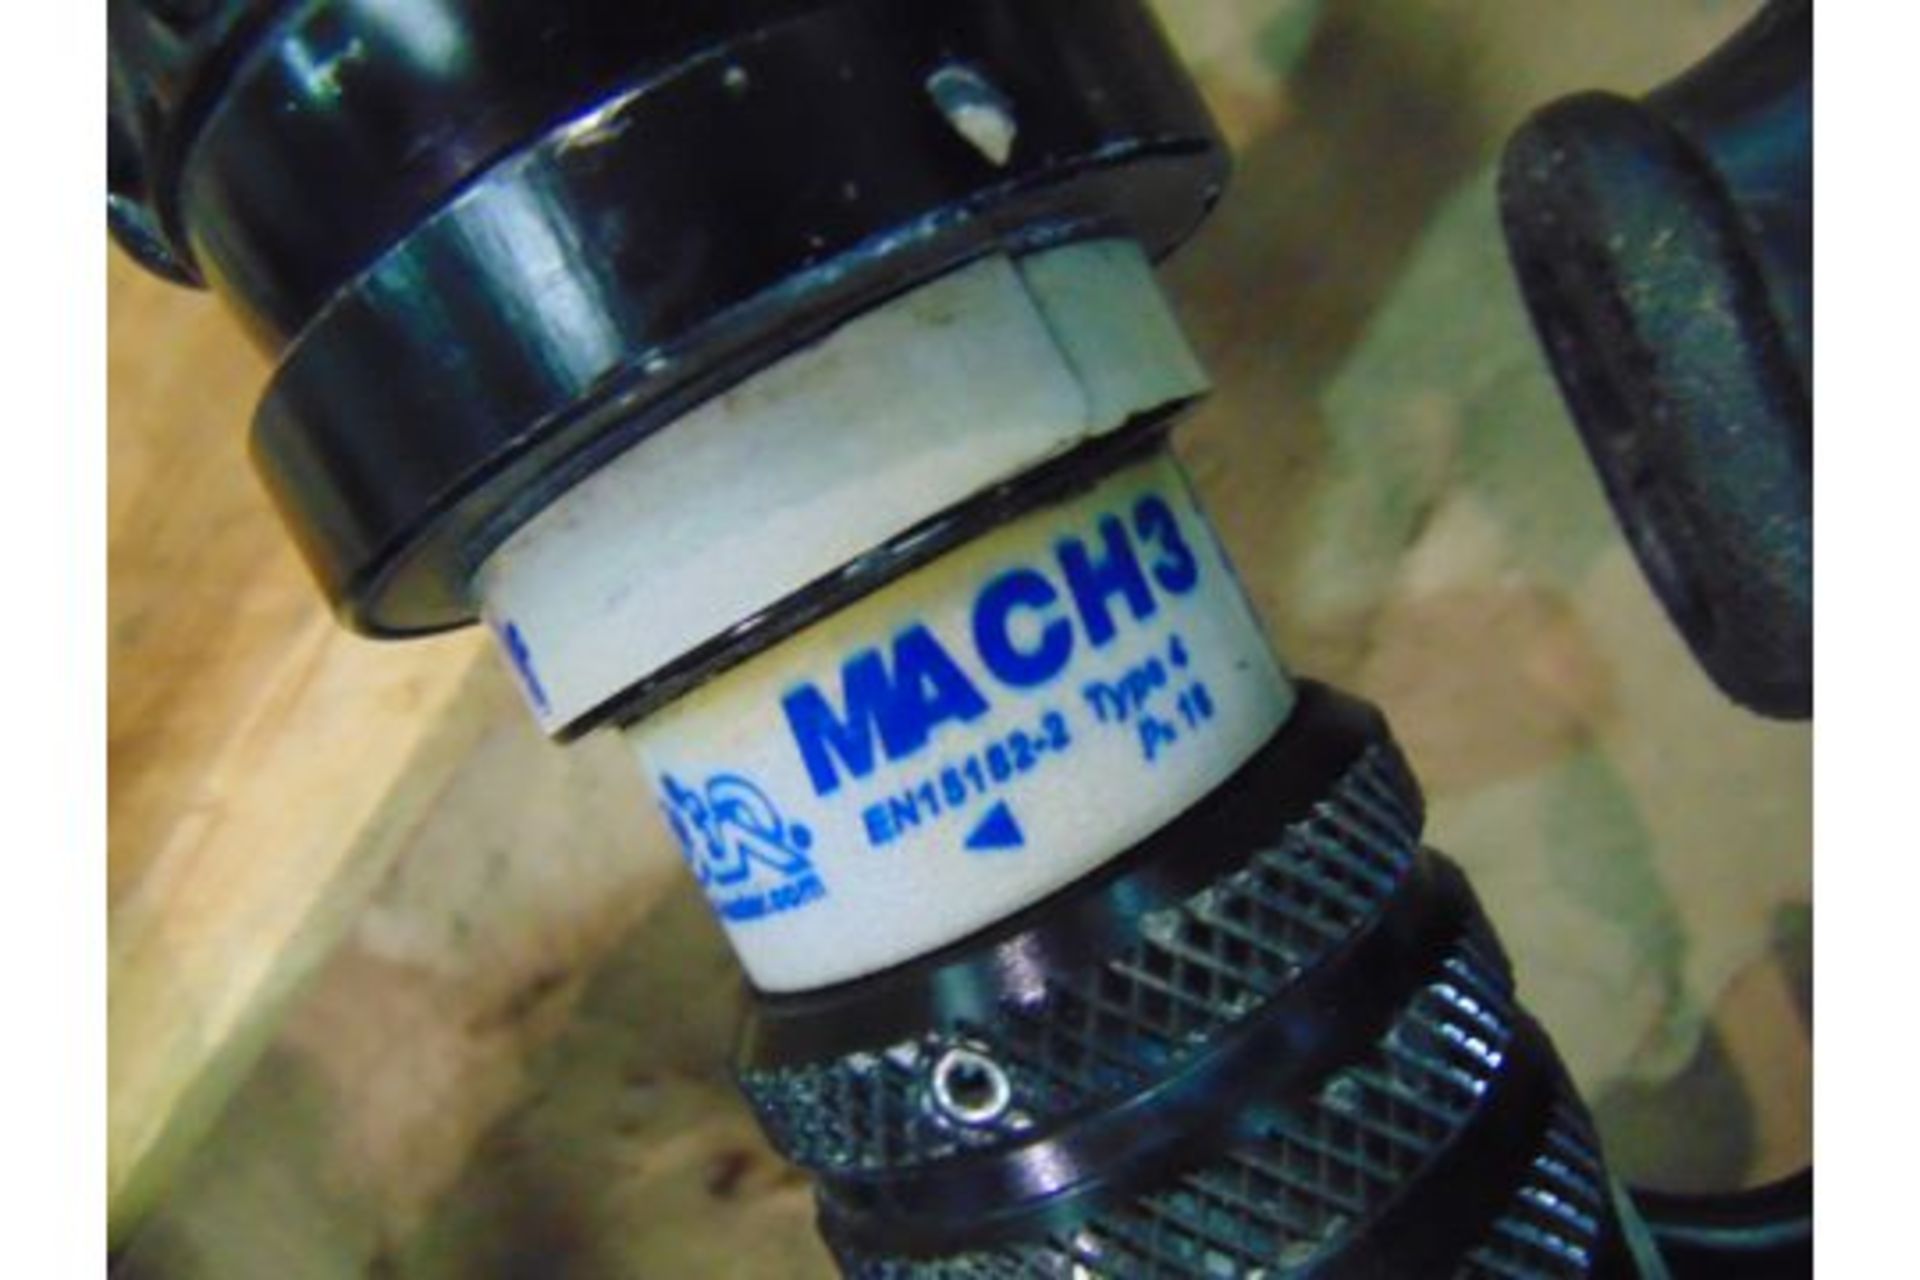 10 x Mach 3 Branch Nozzles. - Image 5 of 5